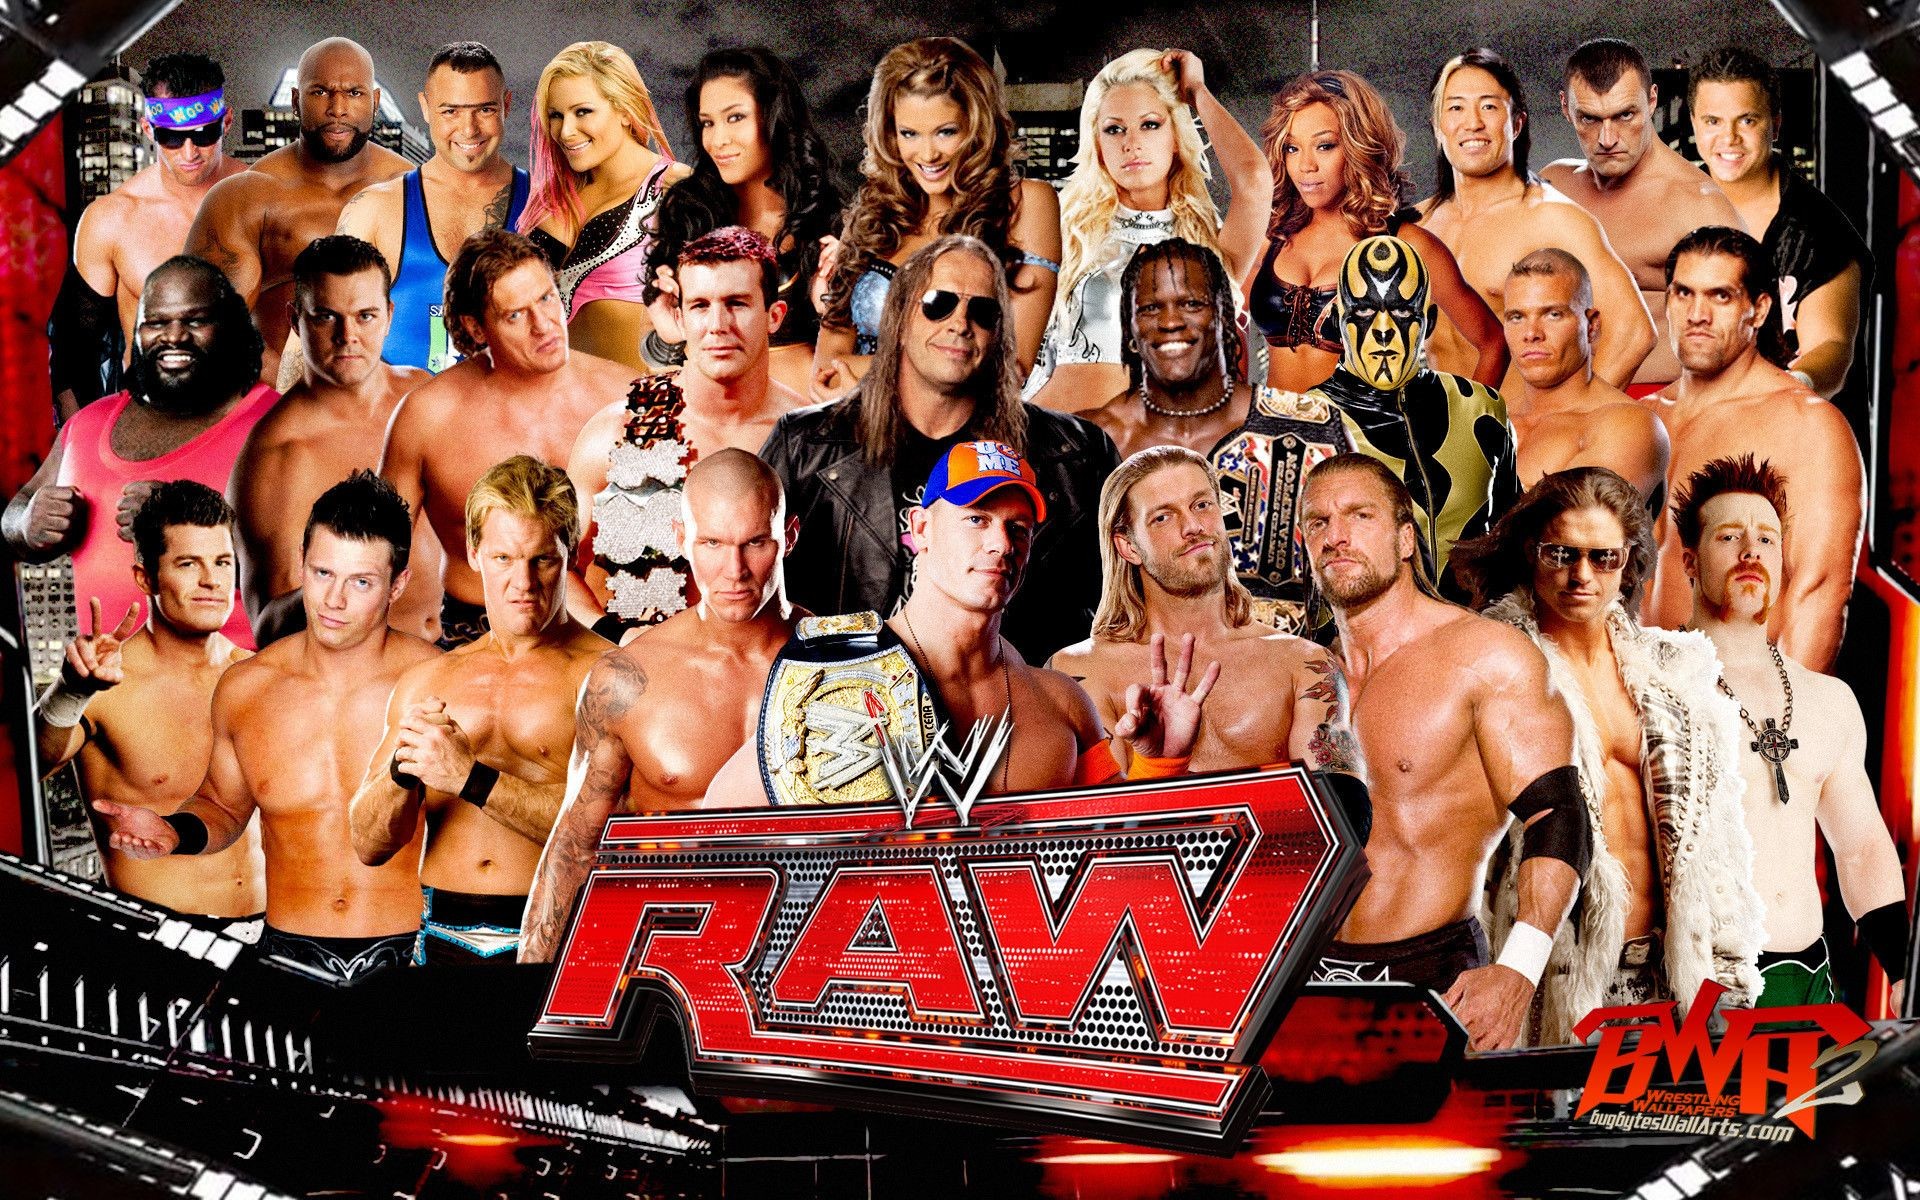 Wwe raw superstars wallpaper pictures